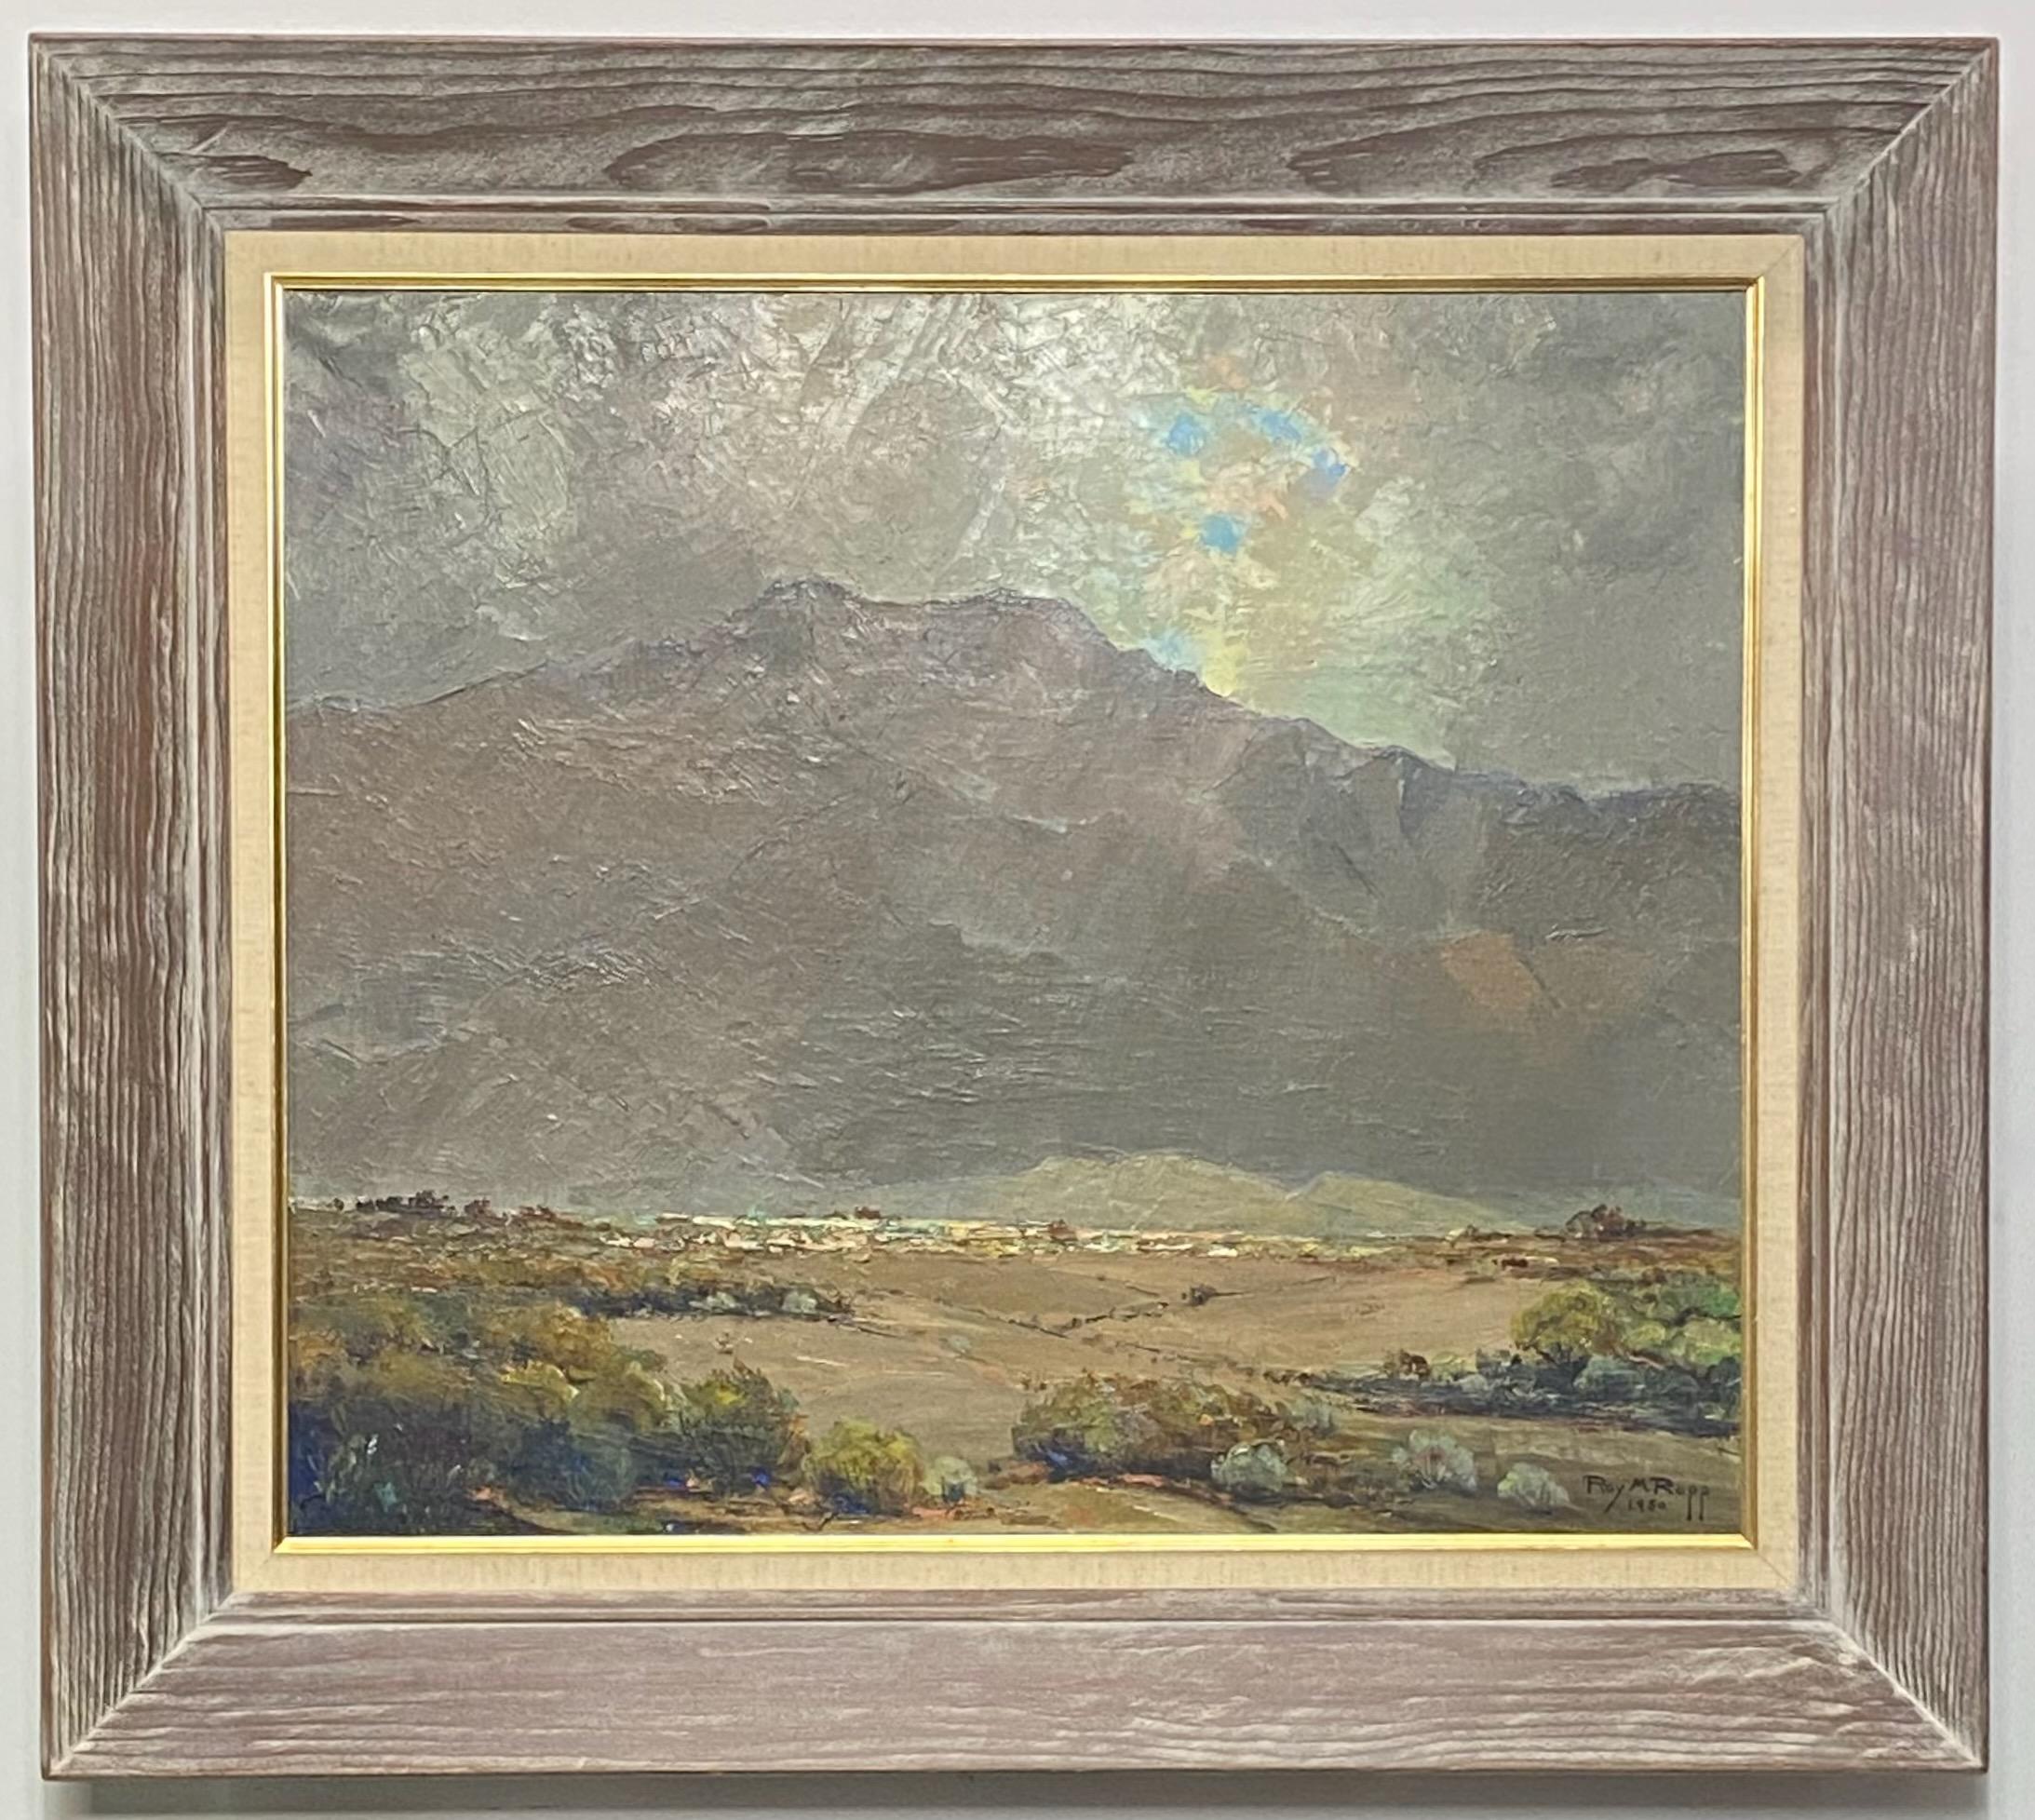 Oil on canvas landscape painting of the Palm Springs area in original frame.
Signed in the lower right Roy M. Ropp, and dated 1951.
American, mid 20th century.
Measurement of the canvas without frame 33.5 wide x 28 high.
In excellent